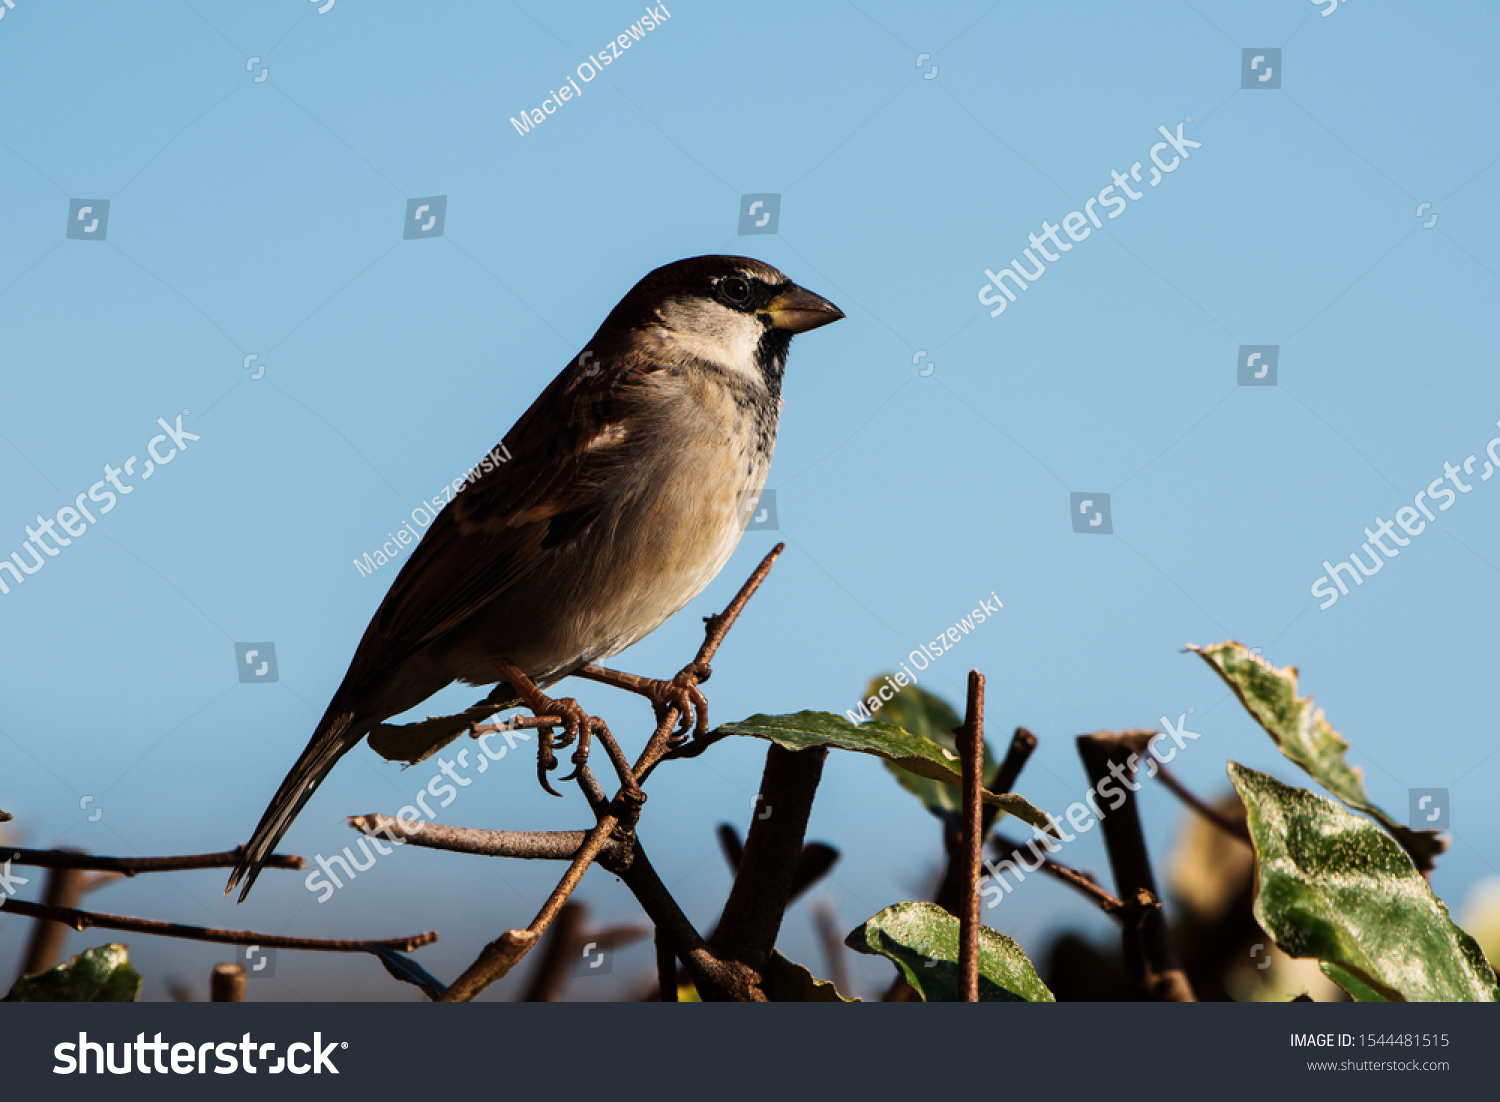 Male of House Sparrow or Sparrow. His Latin name is Passer domesticus. #1544481515